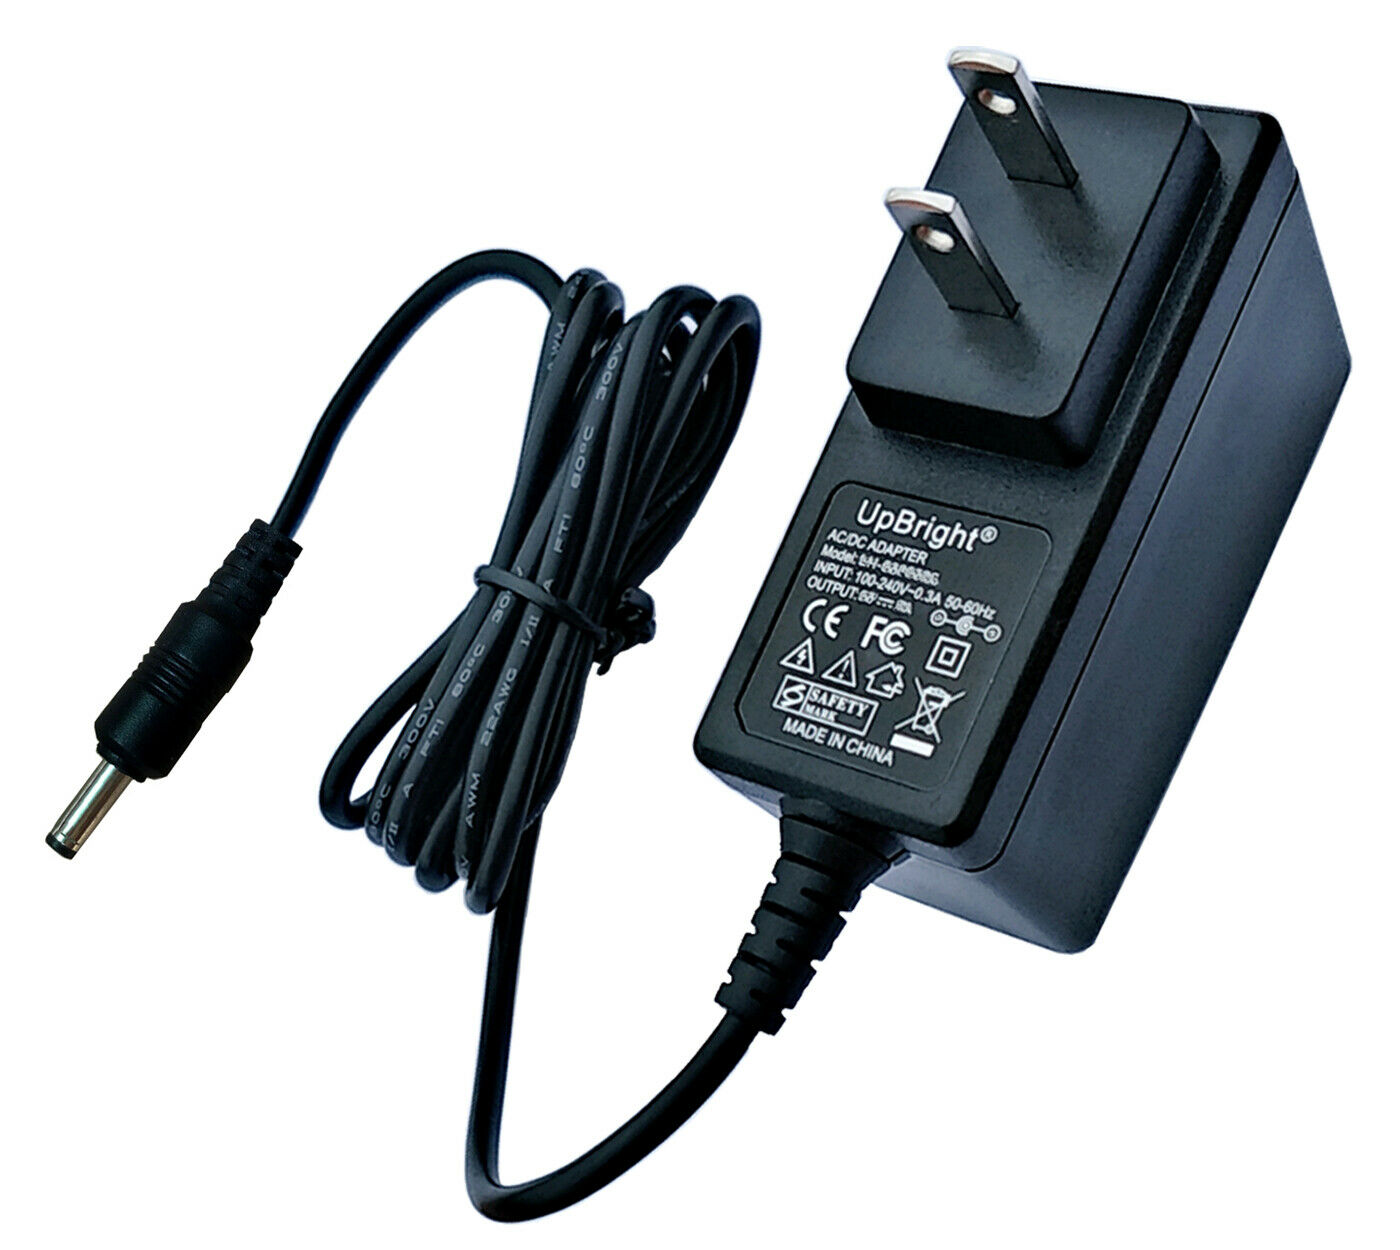 Ac Adapter For Water Tech Pool Blaster Max Cg Eclipse Xl Pba099 Battery Charger